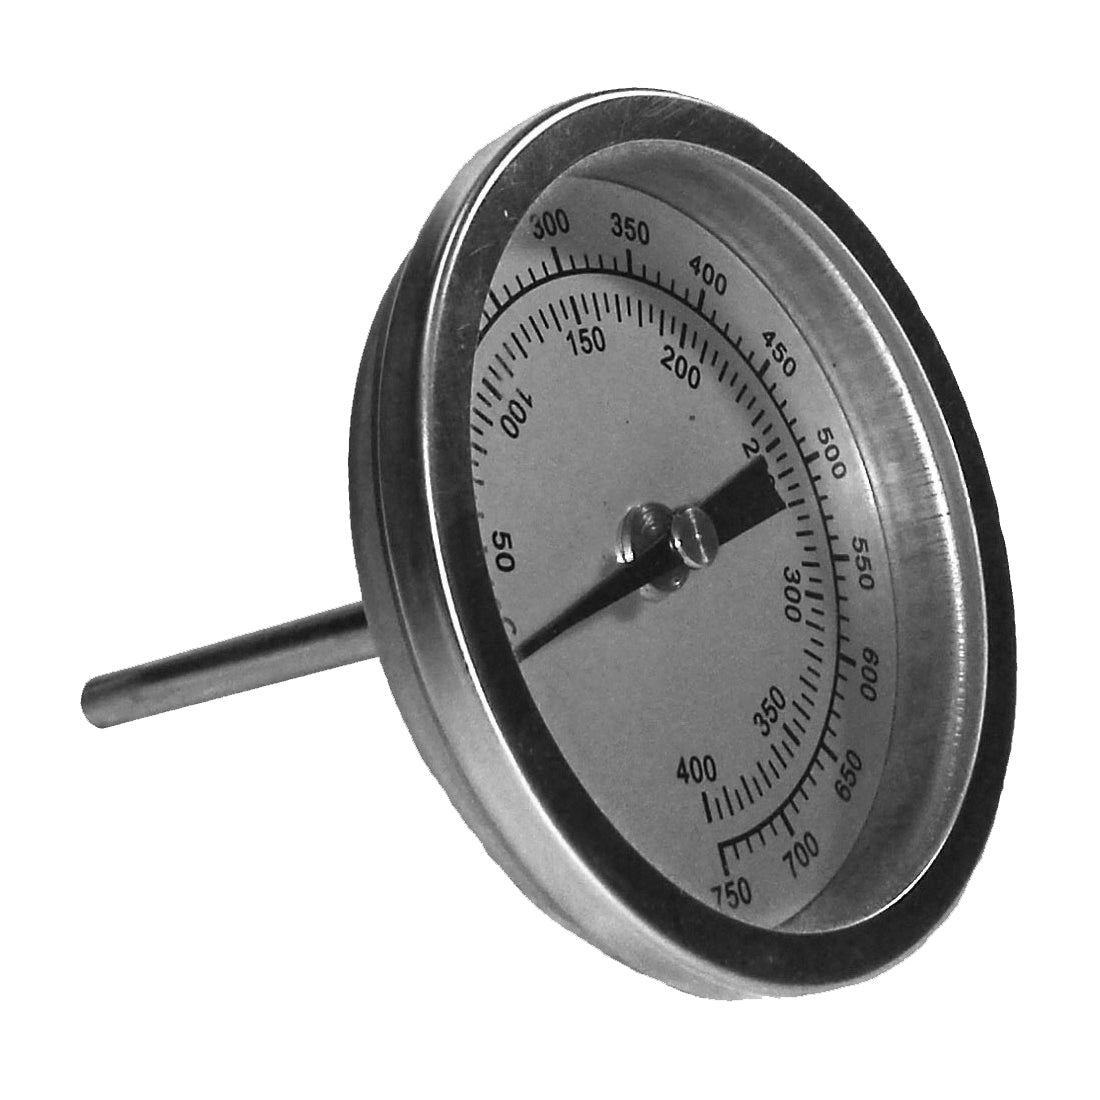 Pit Boss® Digital Meat Thermometer